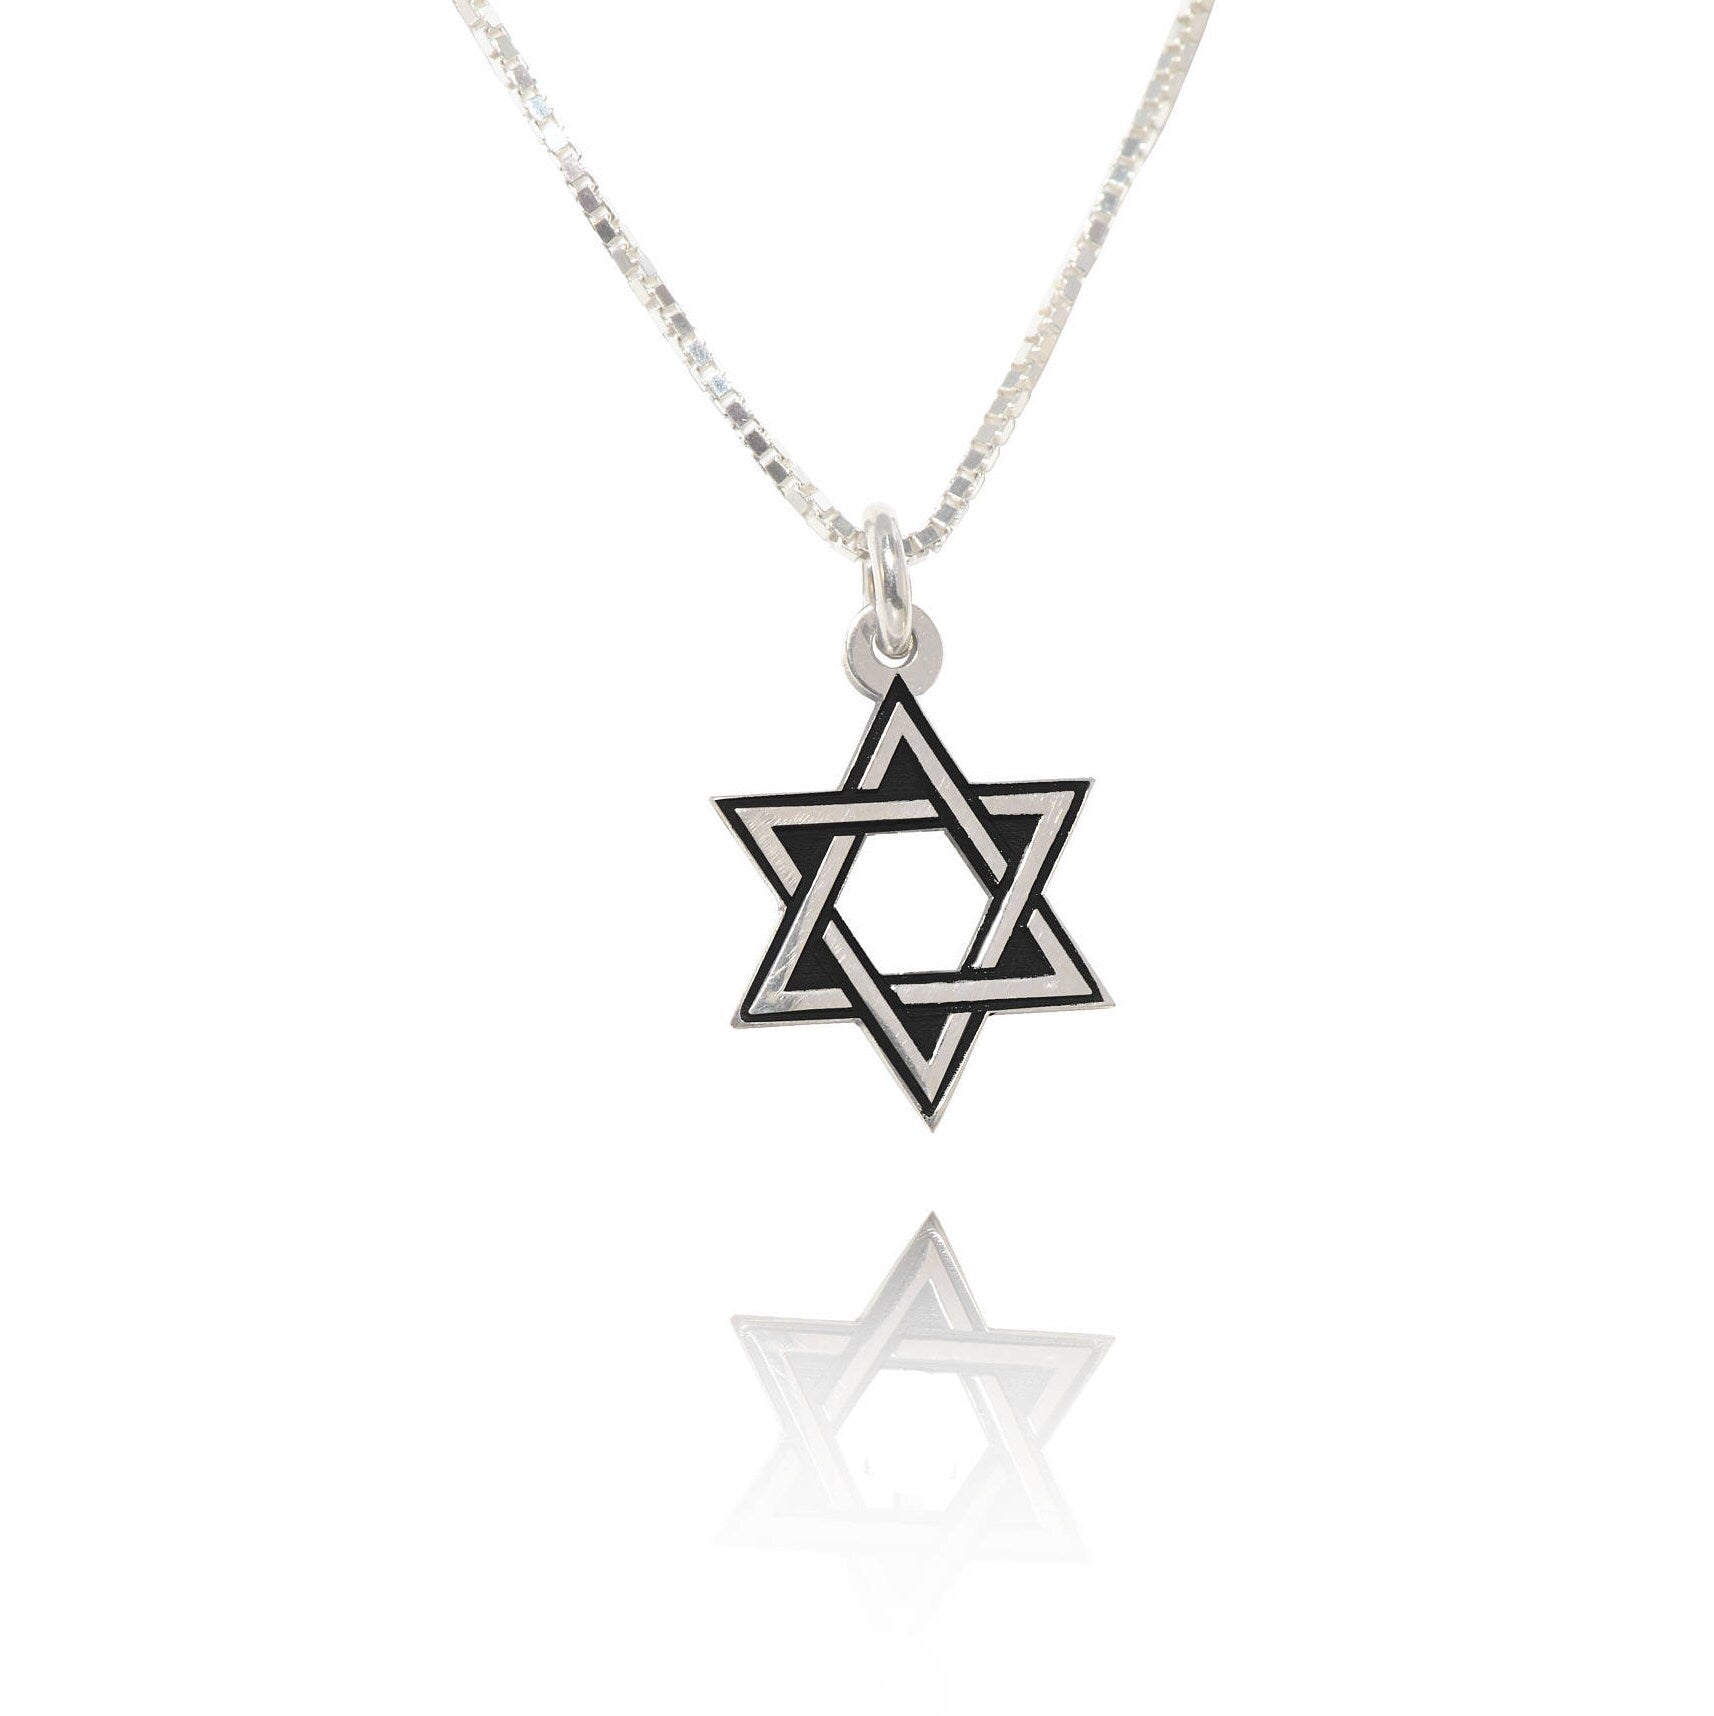 Magen David, Star of David Necklace, birthday gift, gift ideas for her, Personalized Gift, gift for women, Christmas gift